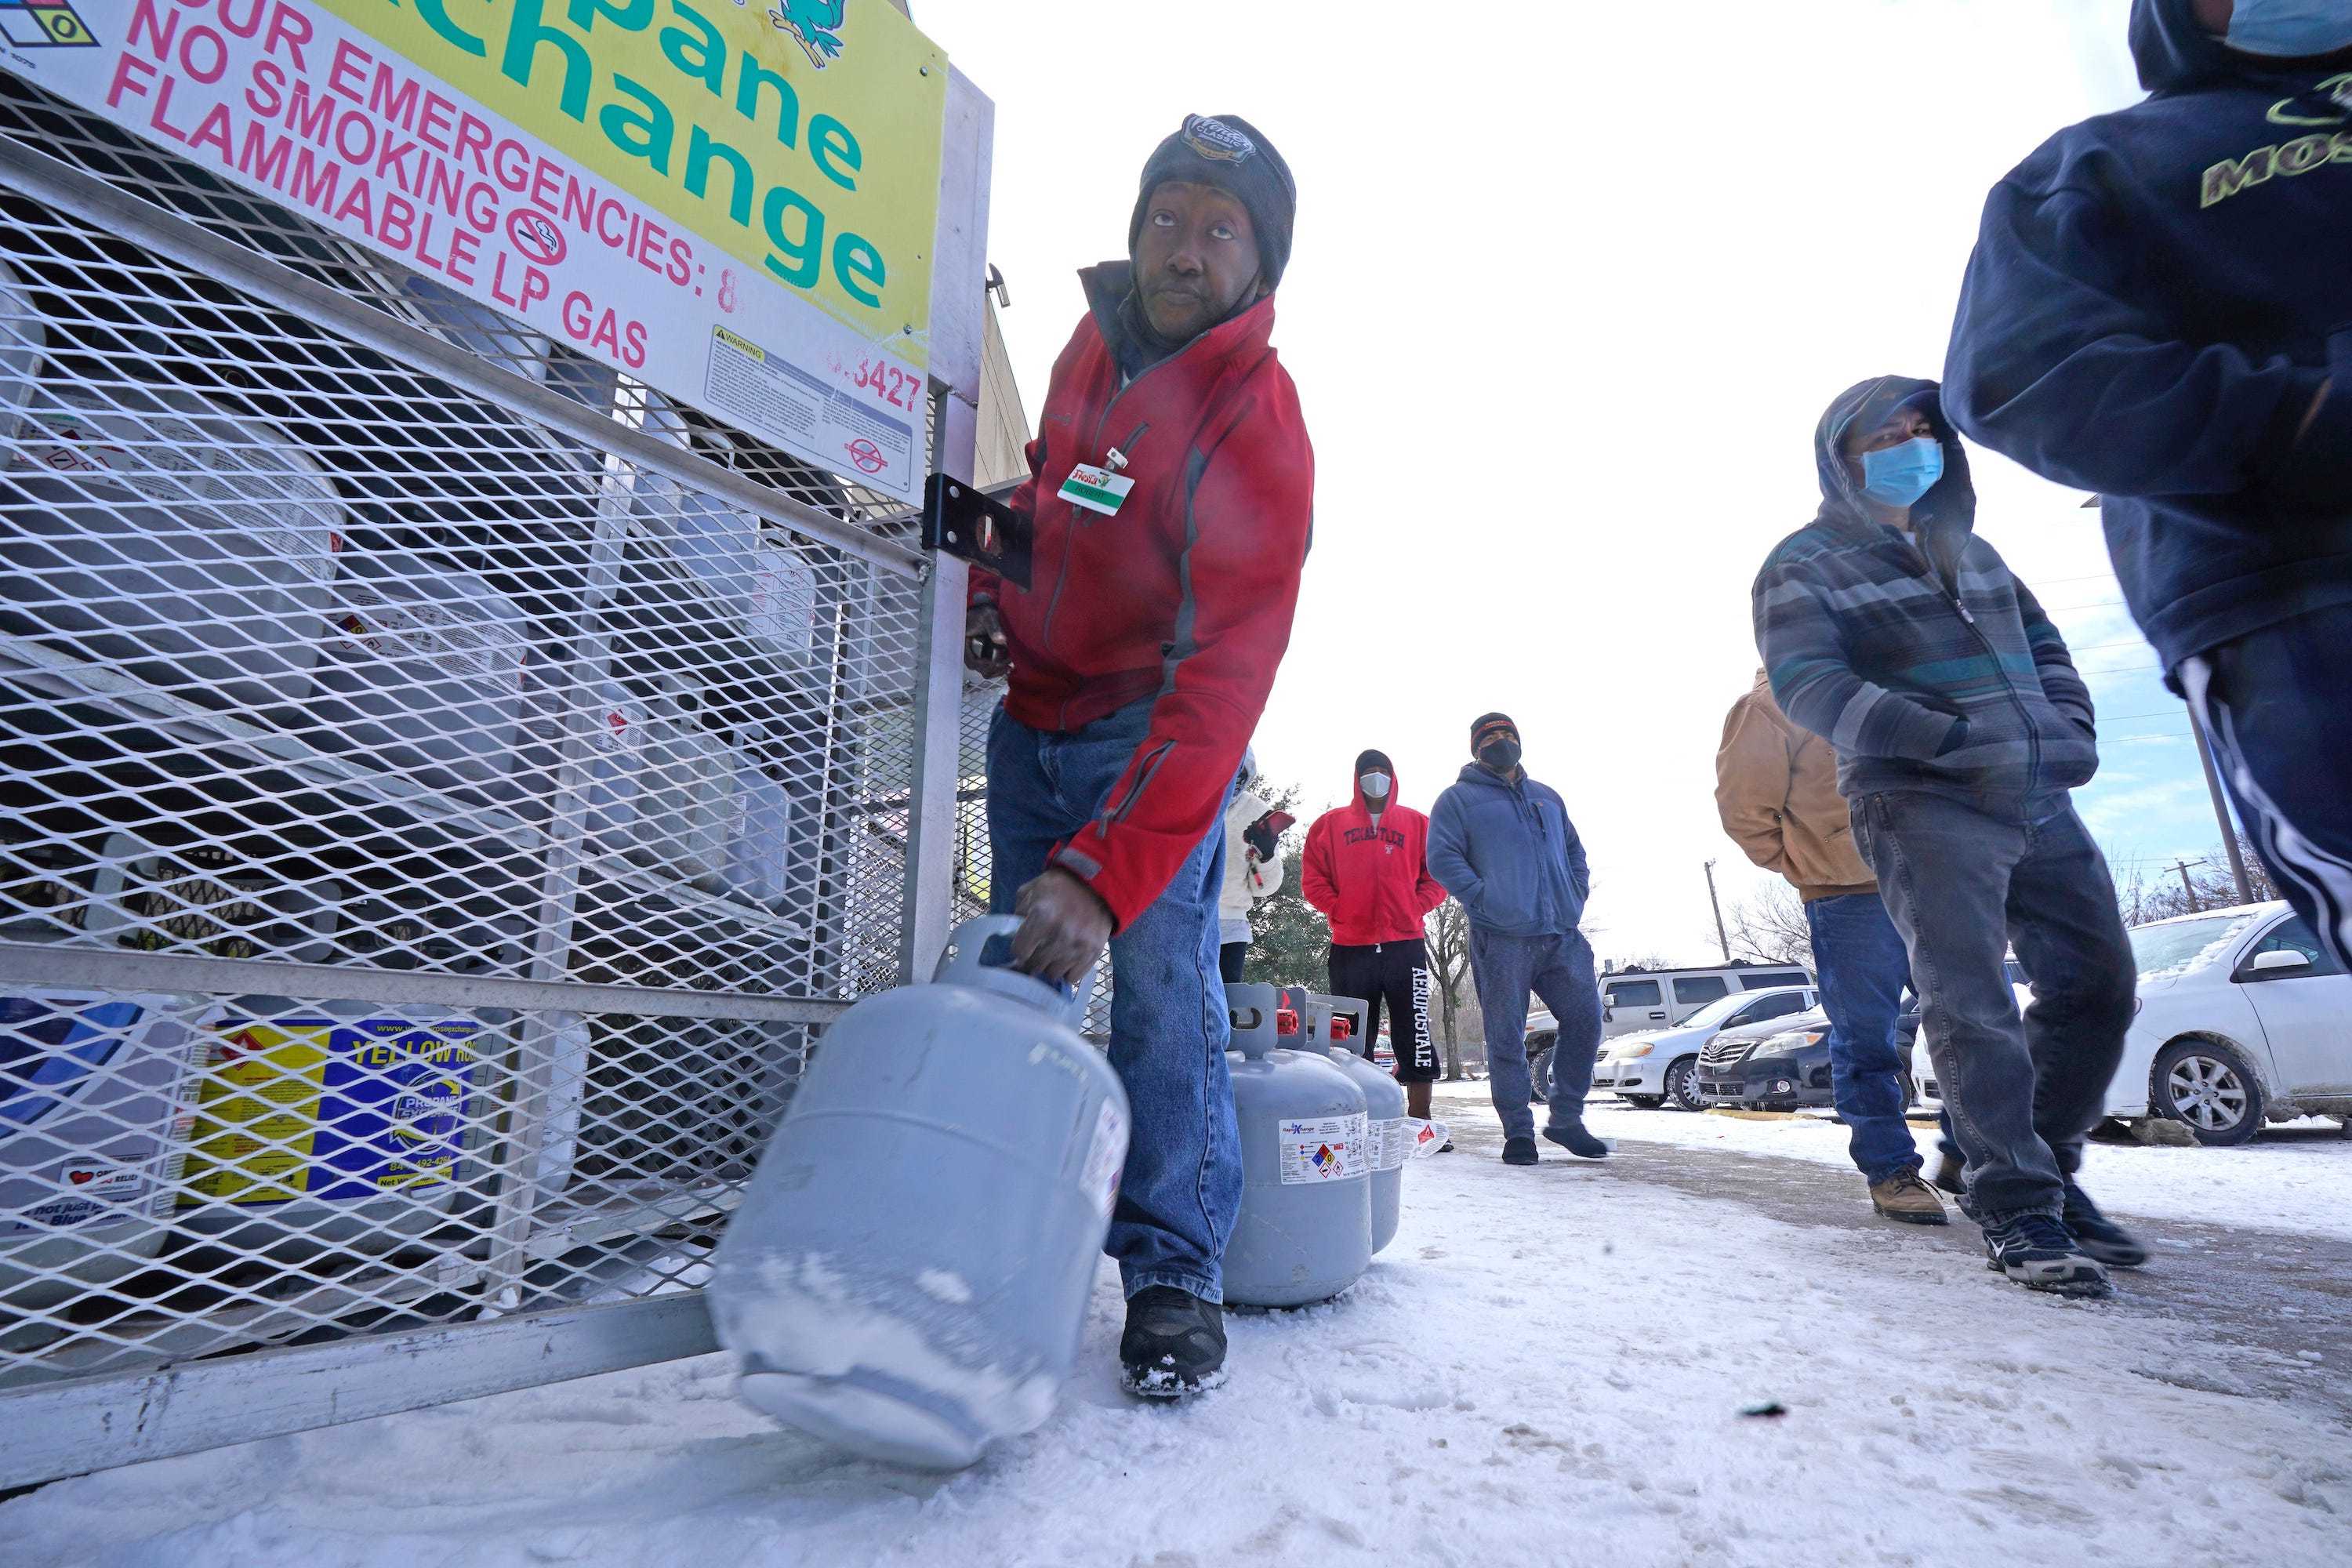 Robert Webster pulls a full canister of propane for sale as customers line up to enter a grocery store Tuesday, Feb. 16, 2021, in Dallas. Even though the store lost power, it was open for cash only sales.